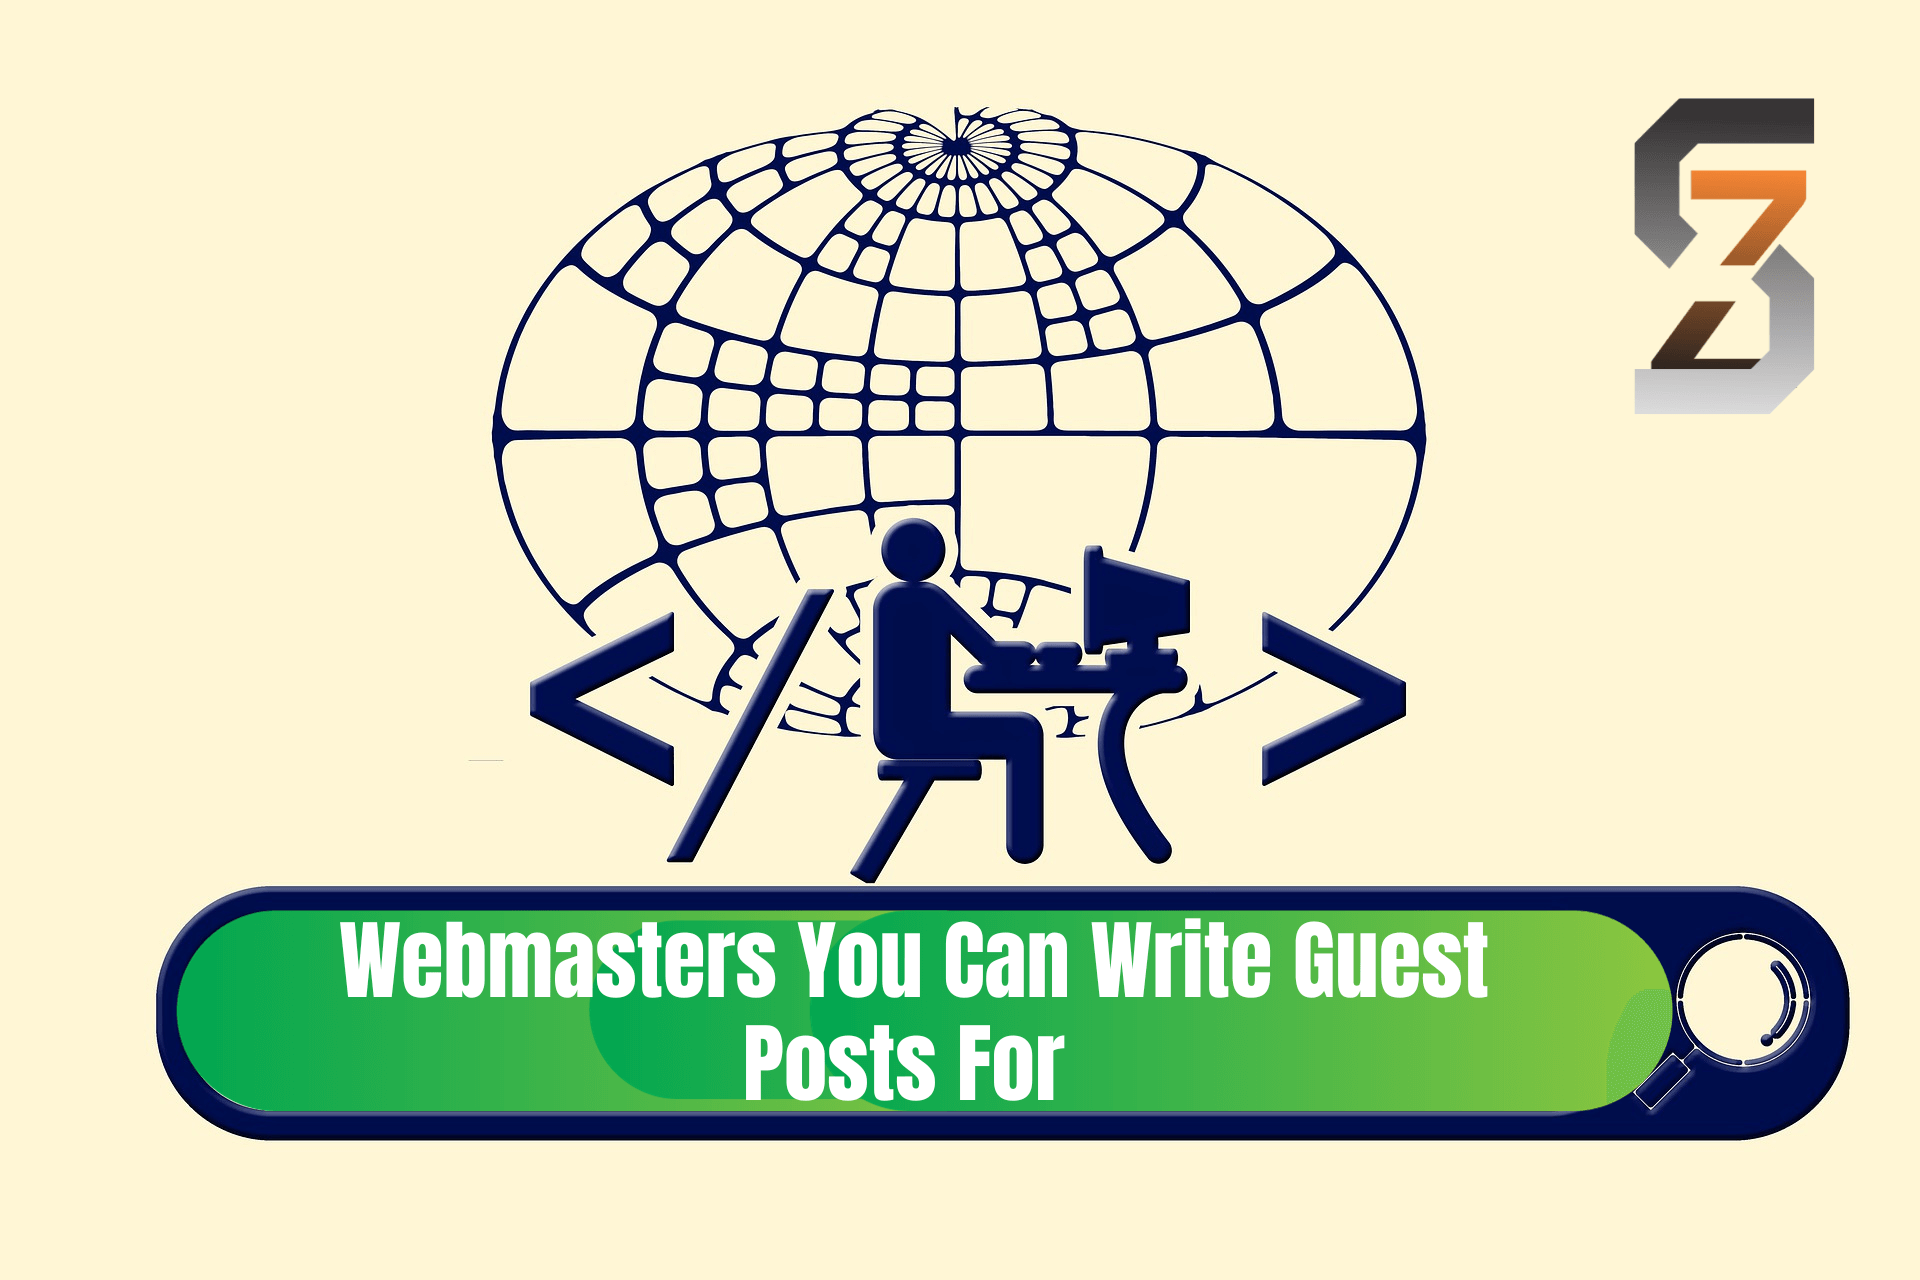 Webmasters You Can Write Guest Posts For